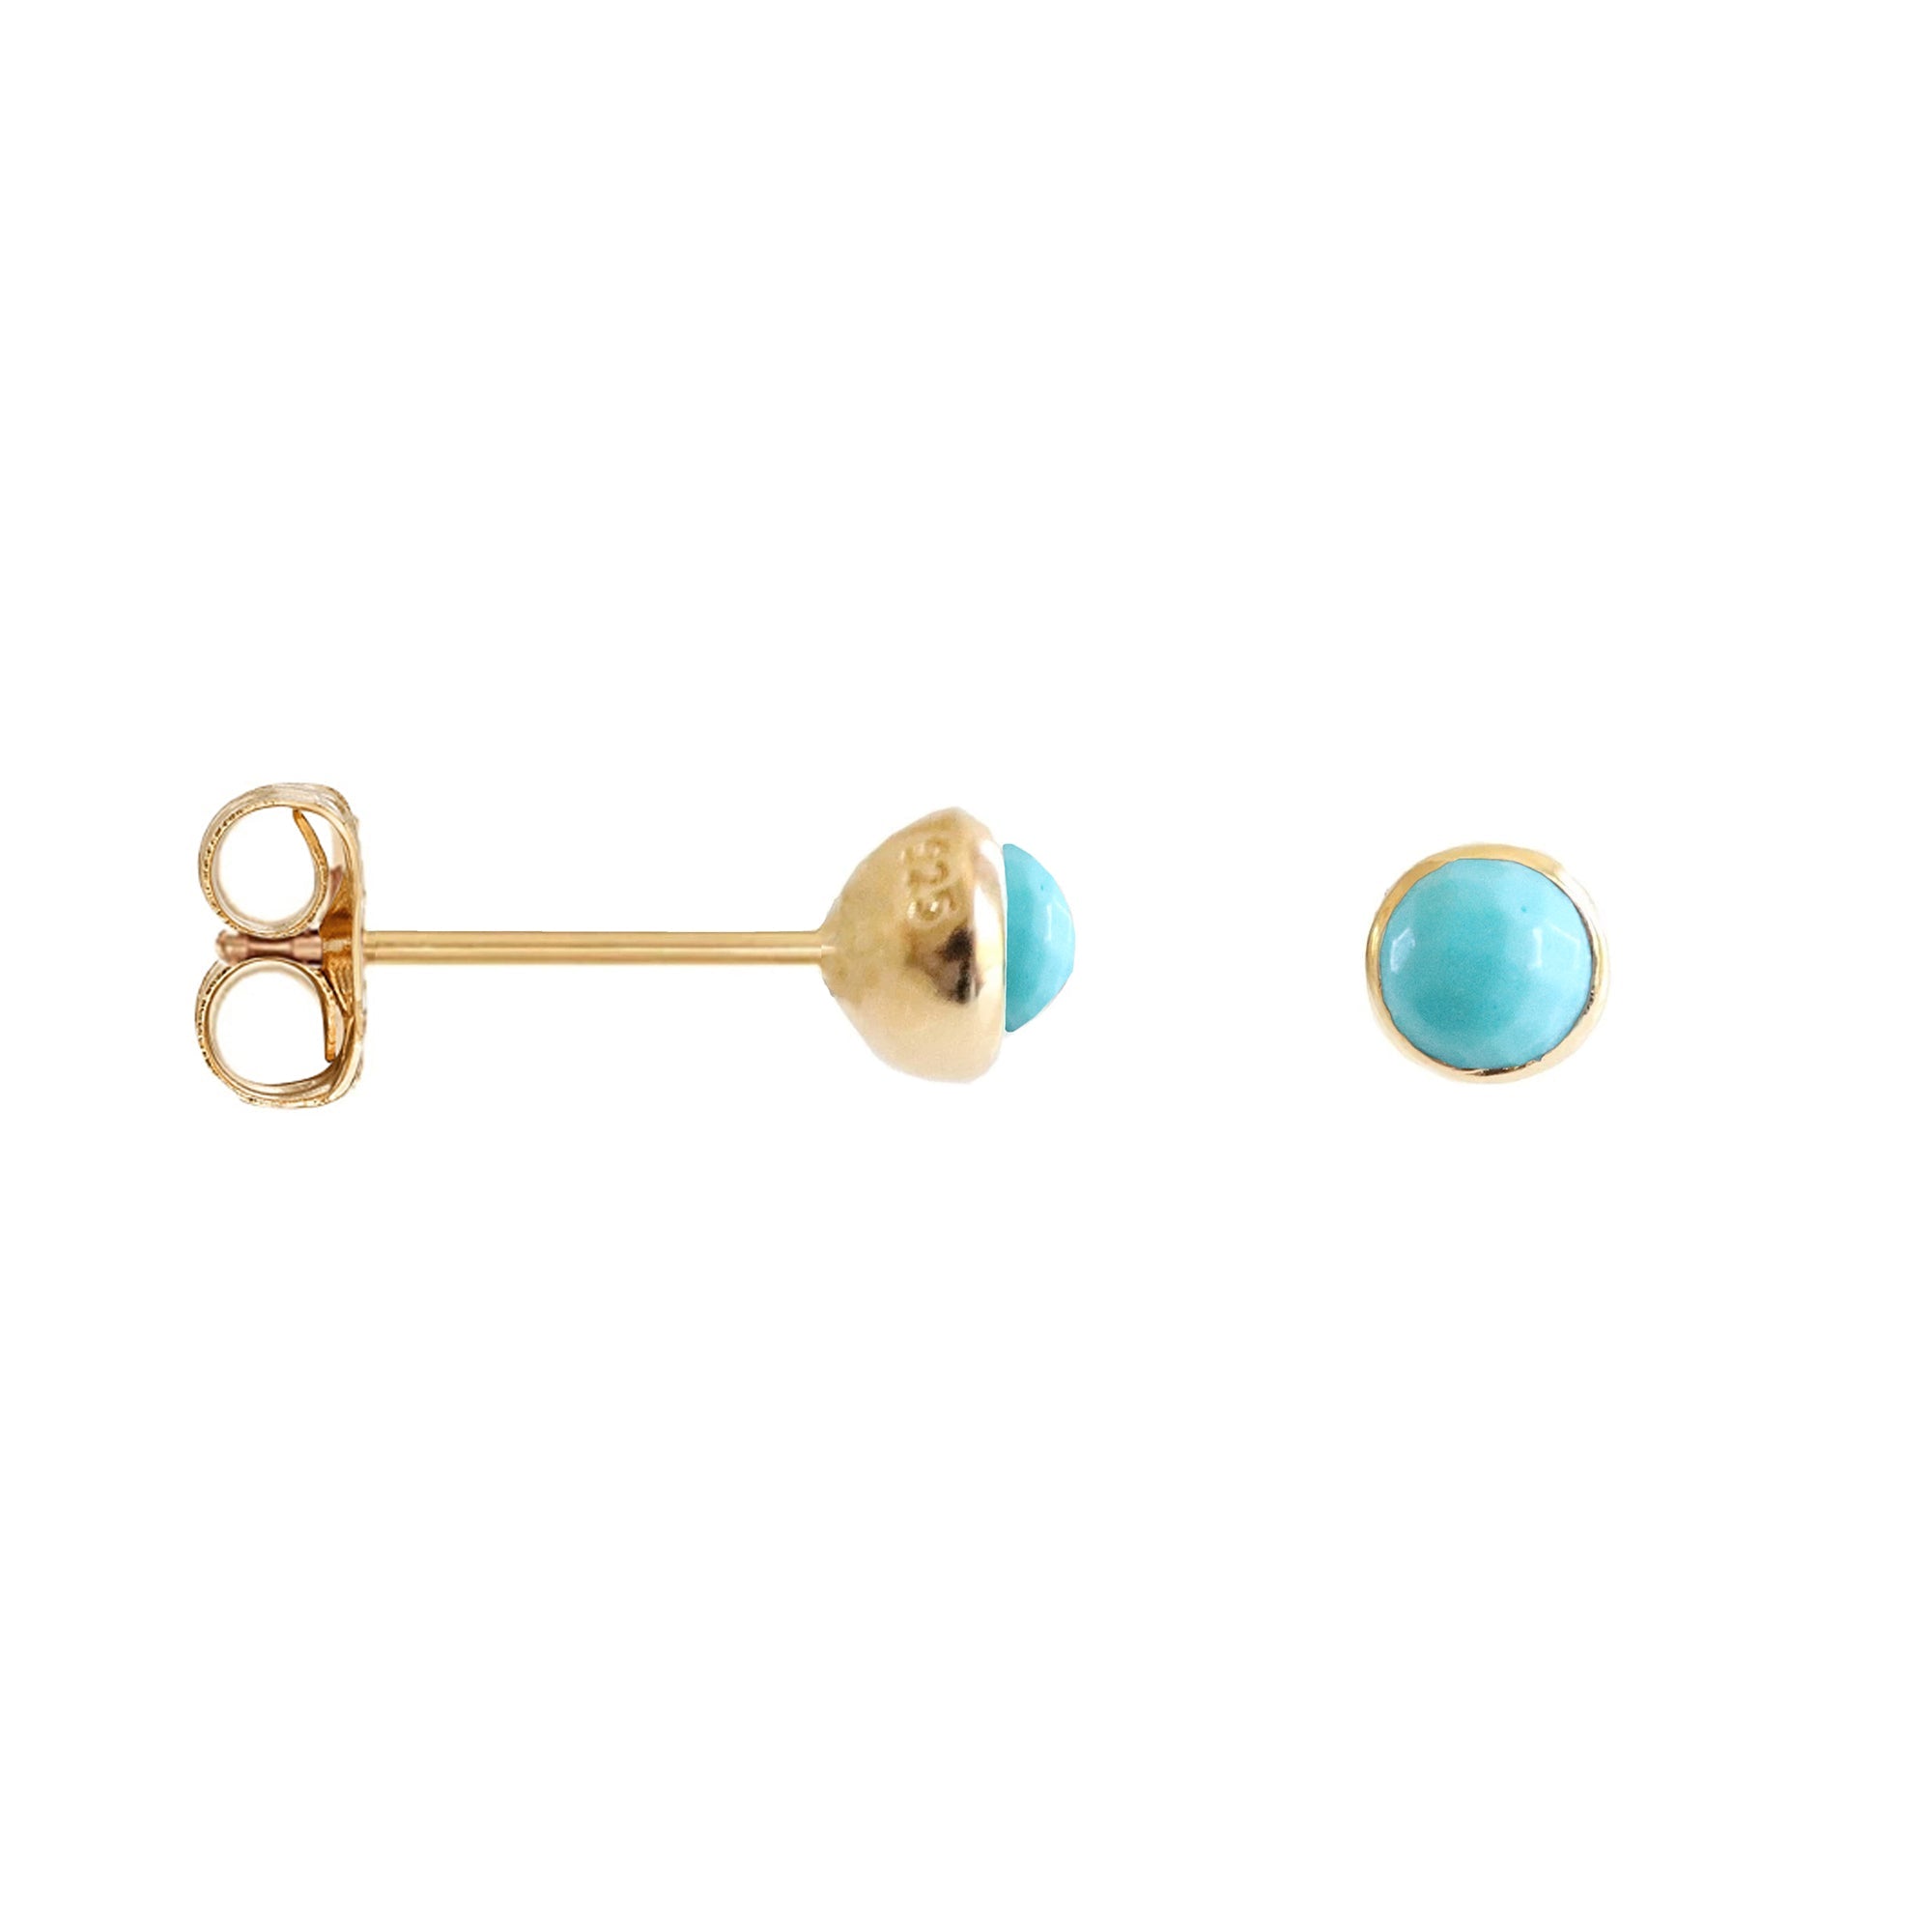 TINY PROTECT STUD EARRINGS - TURQUOISE & GOLD - SO PRETTY CARA COTTER